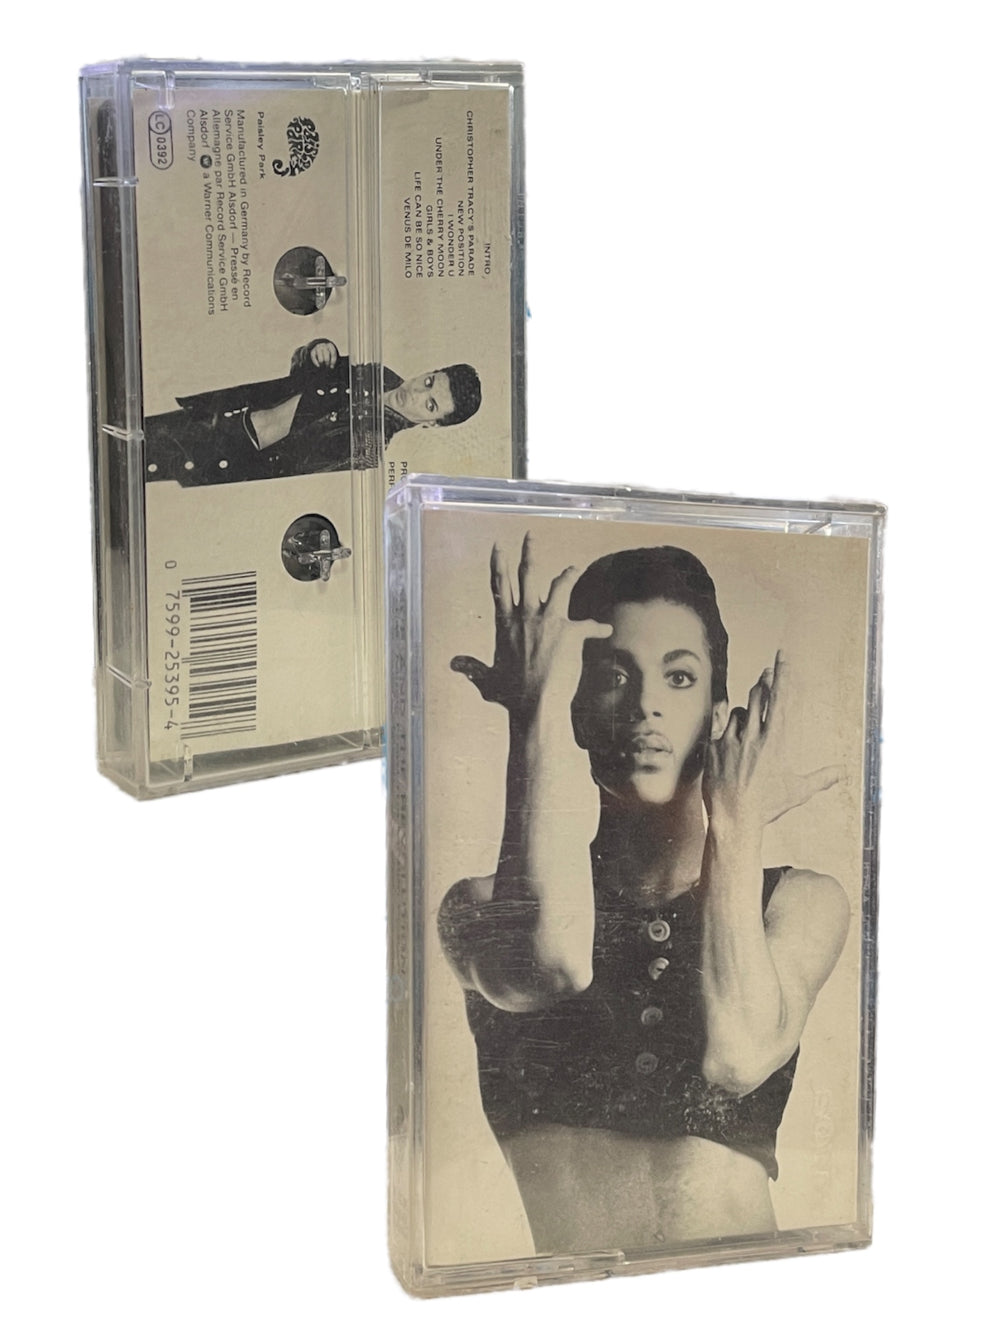 Prince – & The Revolution - Parade Music From The Motion Picture Under The Cherry Moon Cassette Album EU Preloved:1986